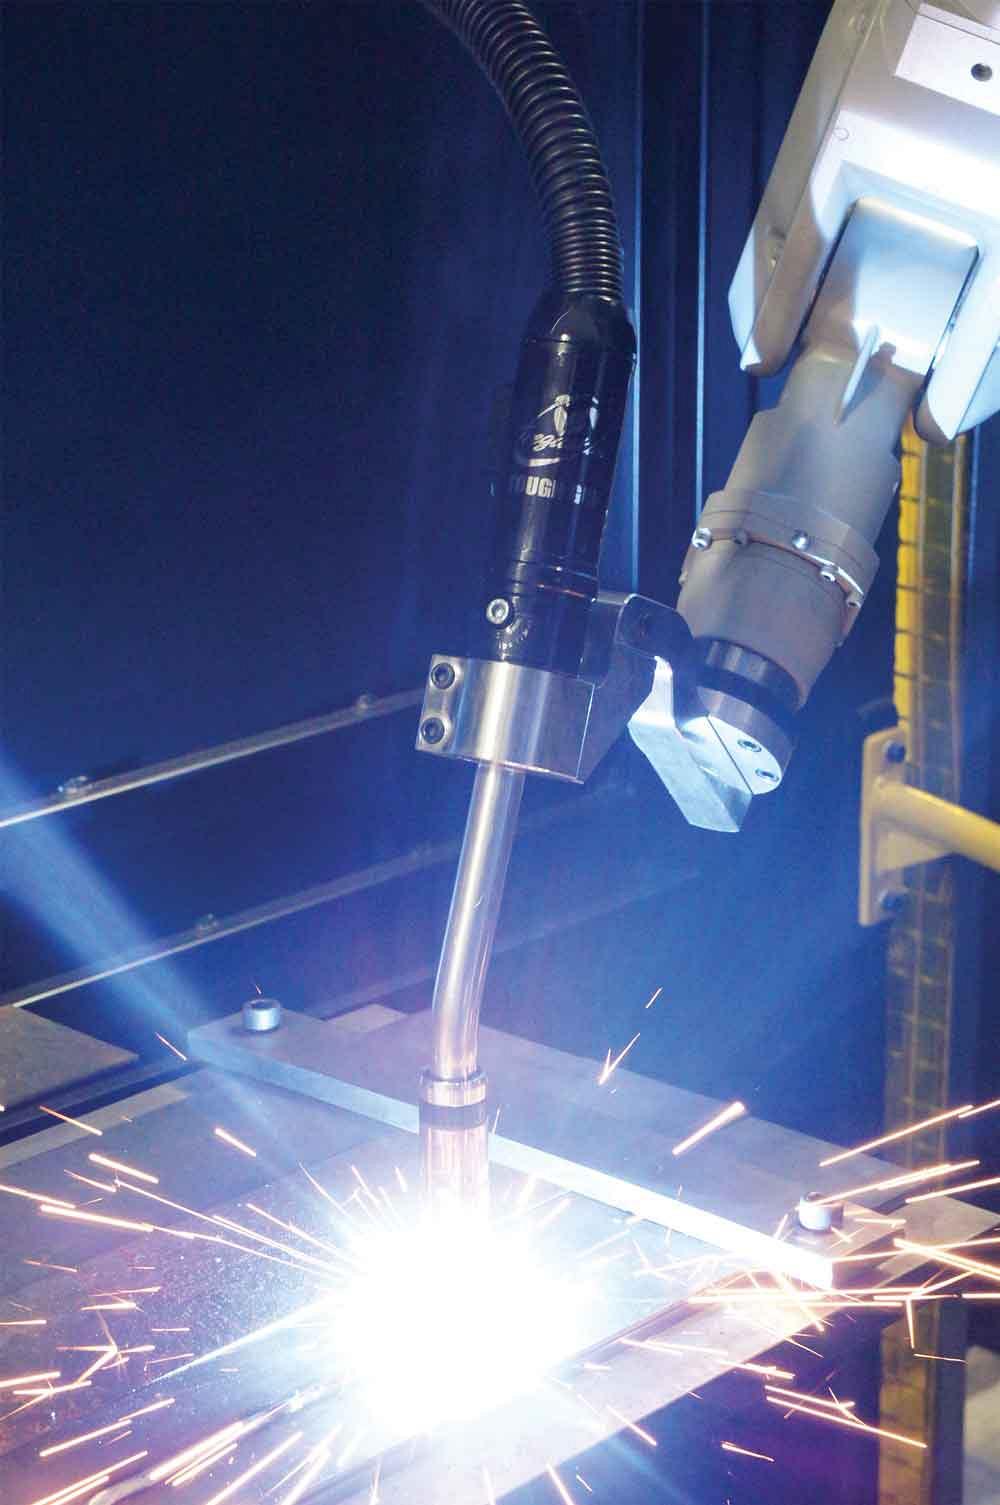 Having welding operators and robotic weld cell supervisors who can quickly troubleshoot and solve problems makes all the difference when it comes to keeping costs down, generating high-quality results, and maintaining optimal efficiency.